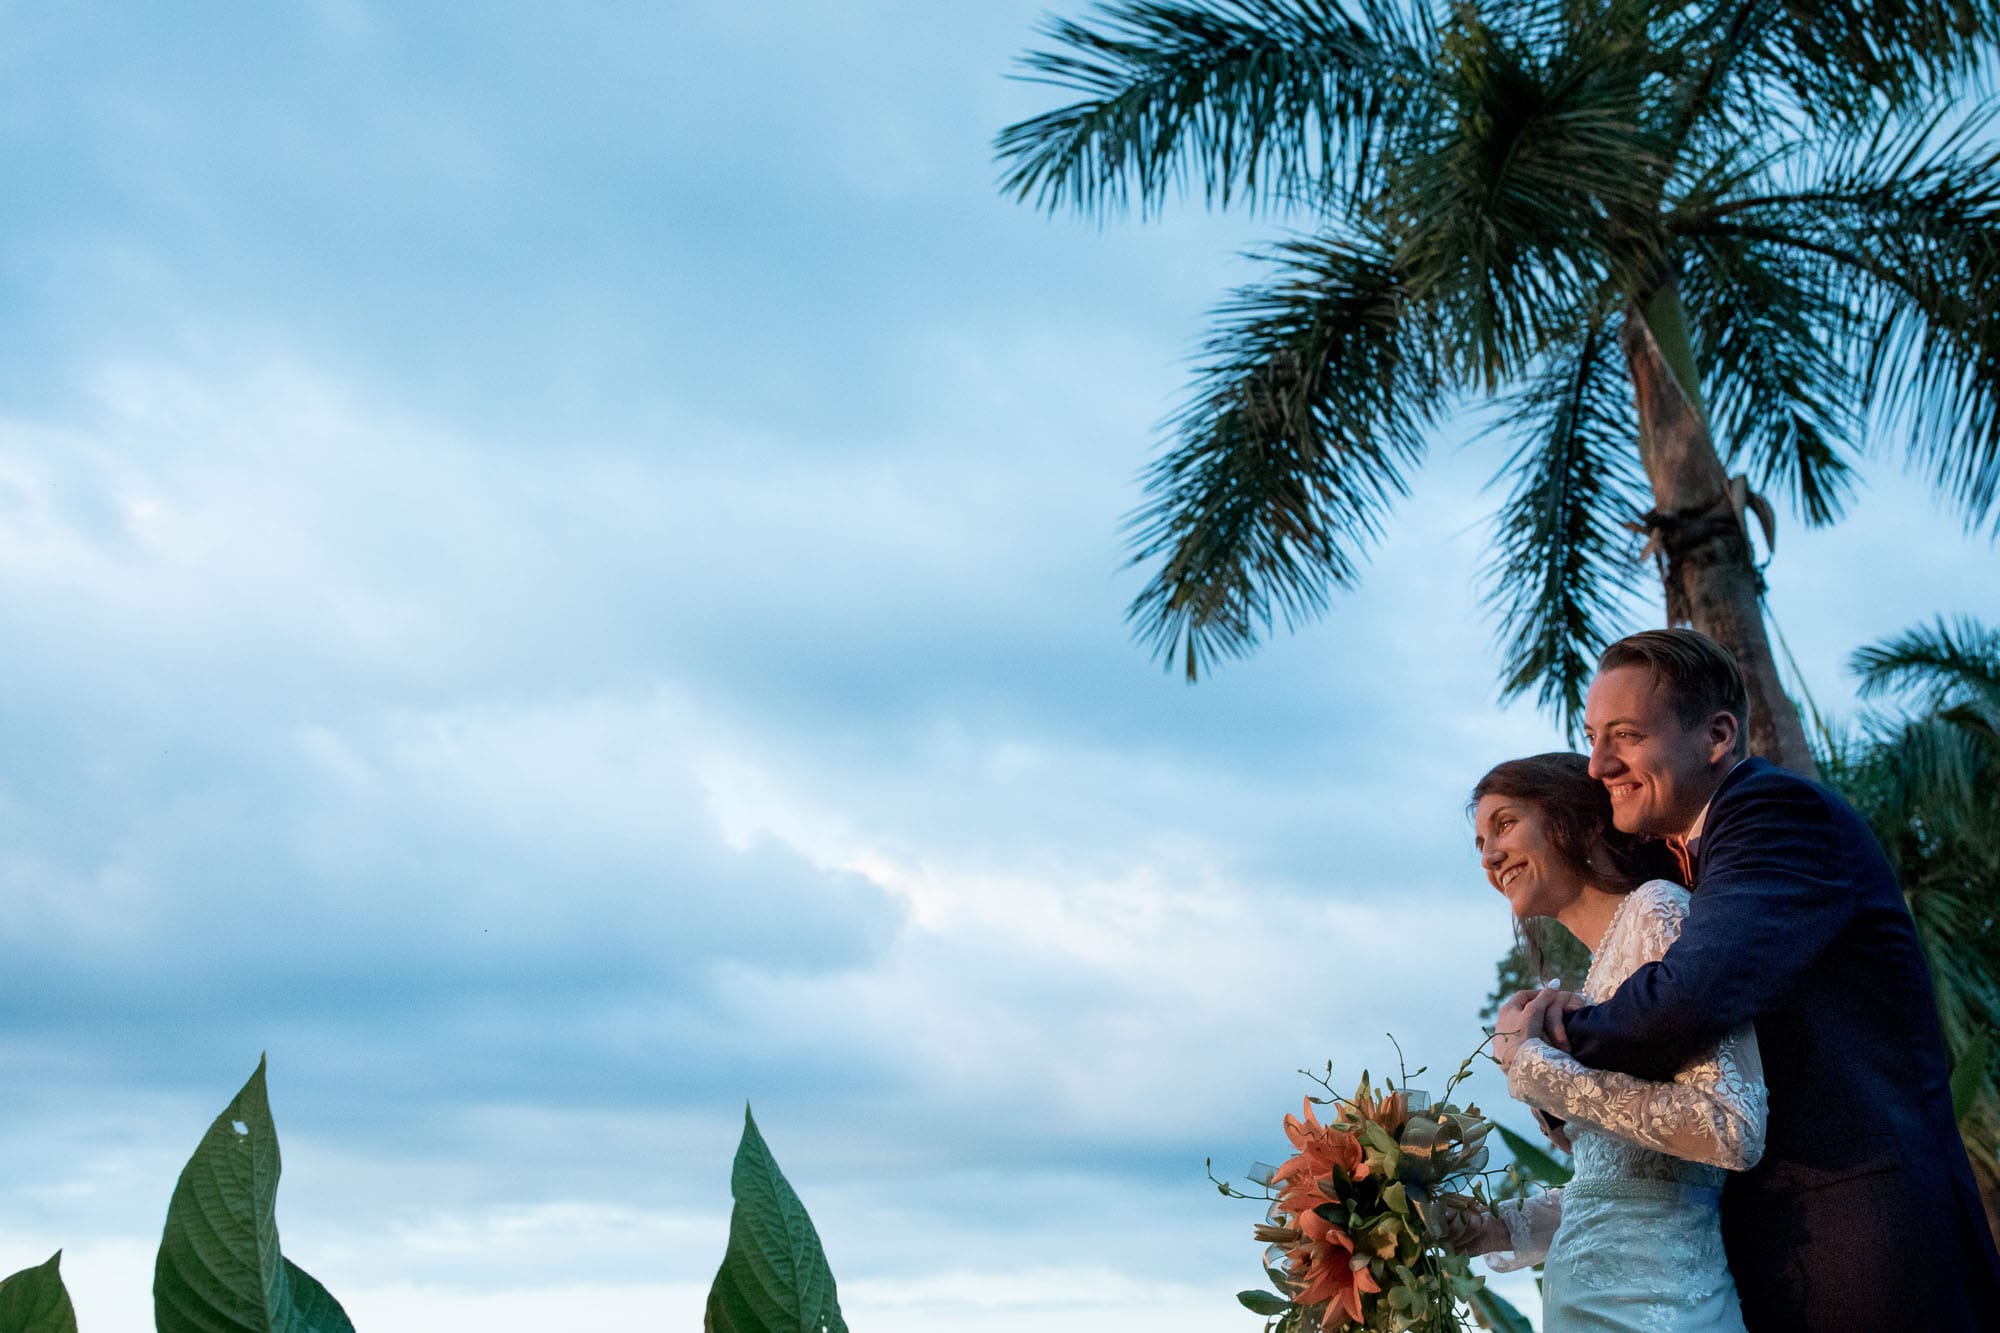 Bridal portraits in one of the best places to elope in the world